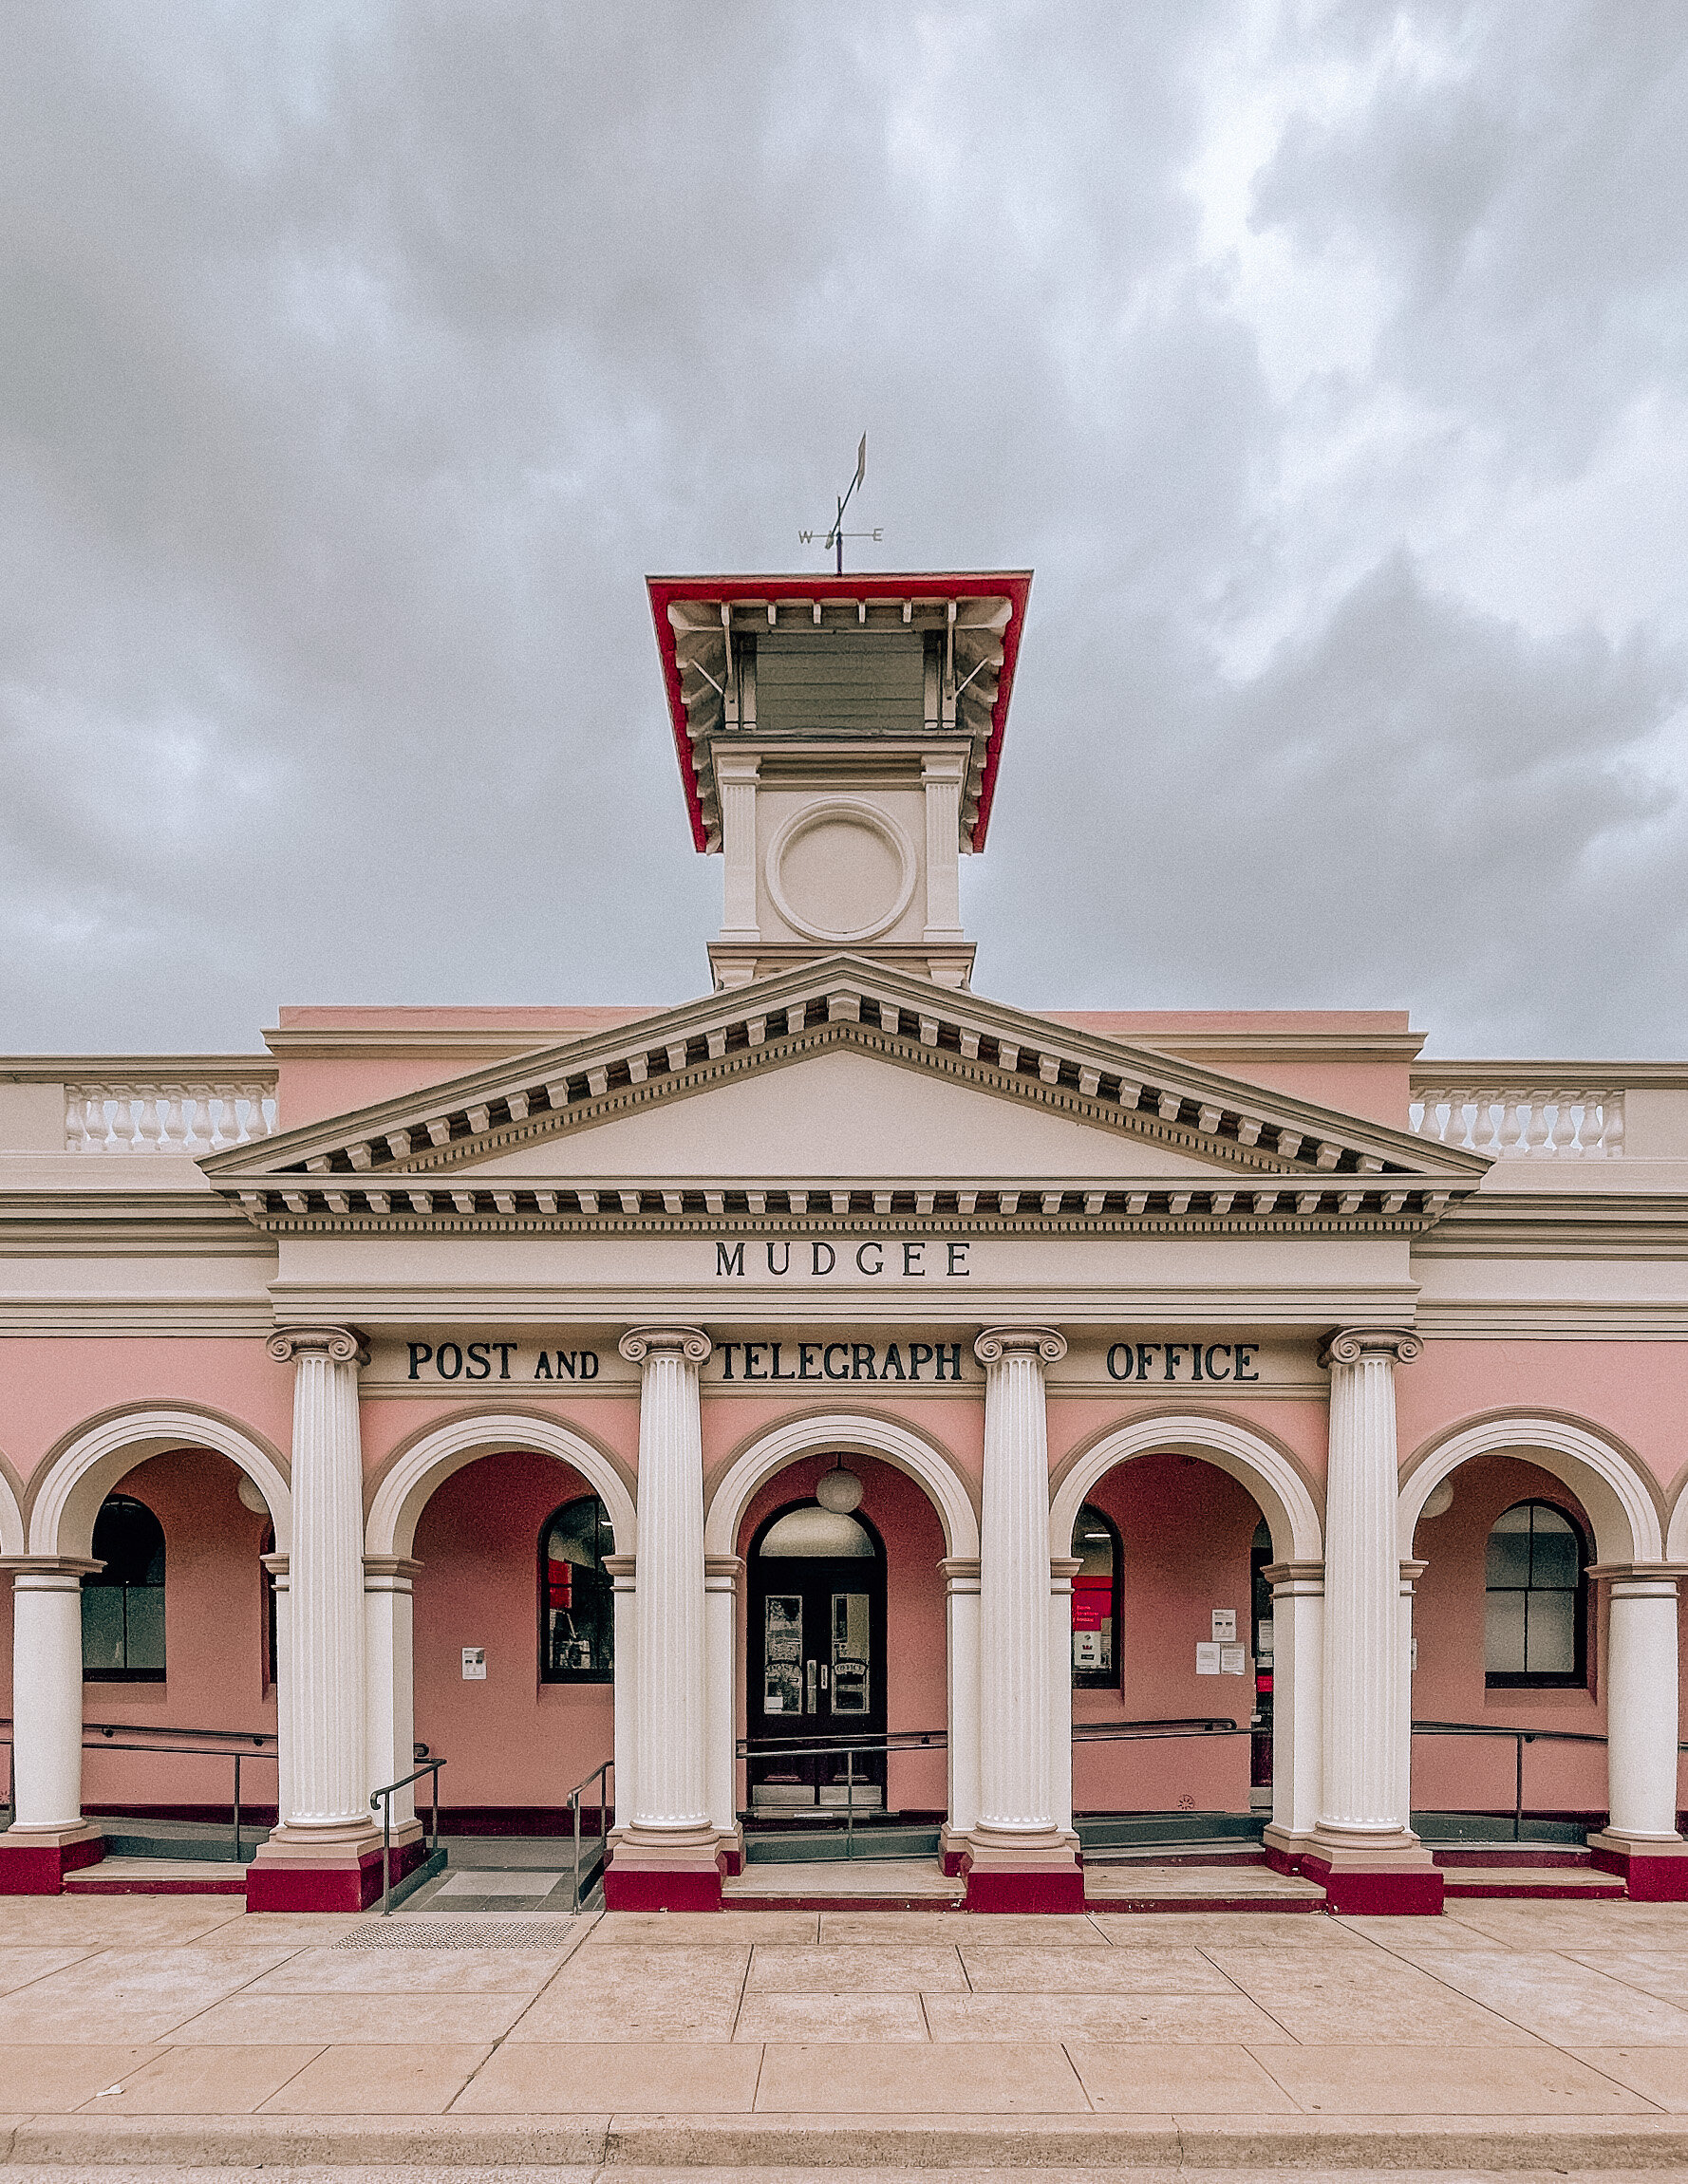 Post and Telegraph Office - Mudgee - New South Wales (NSW) - Australia